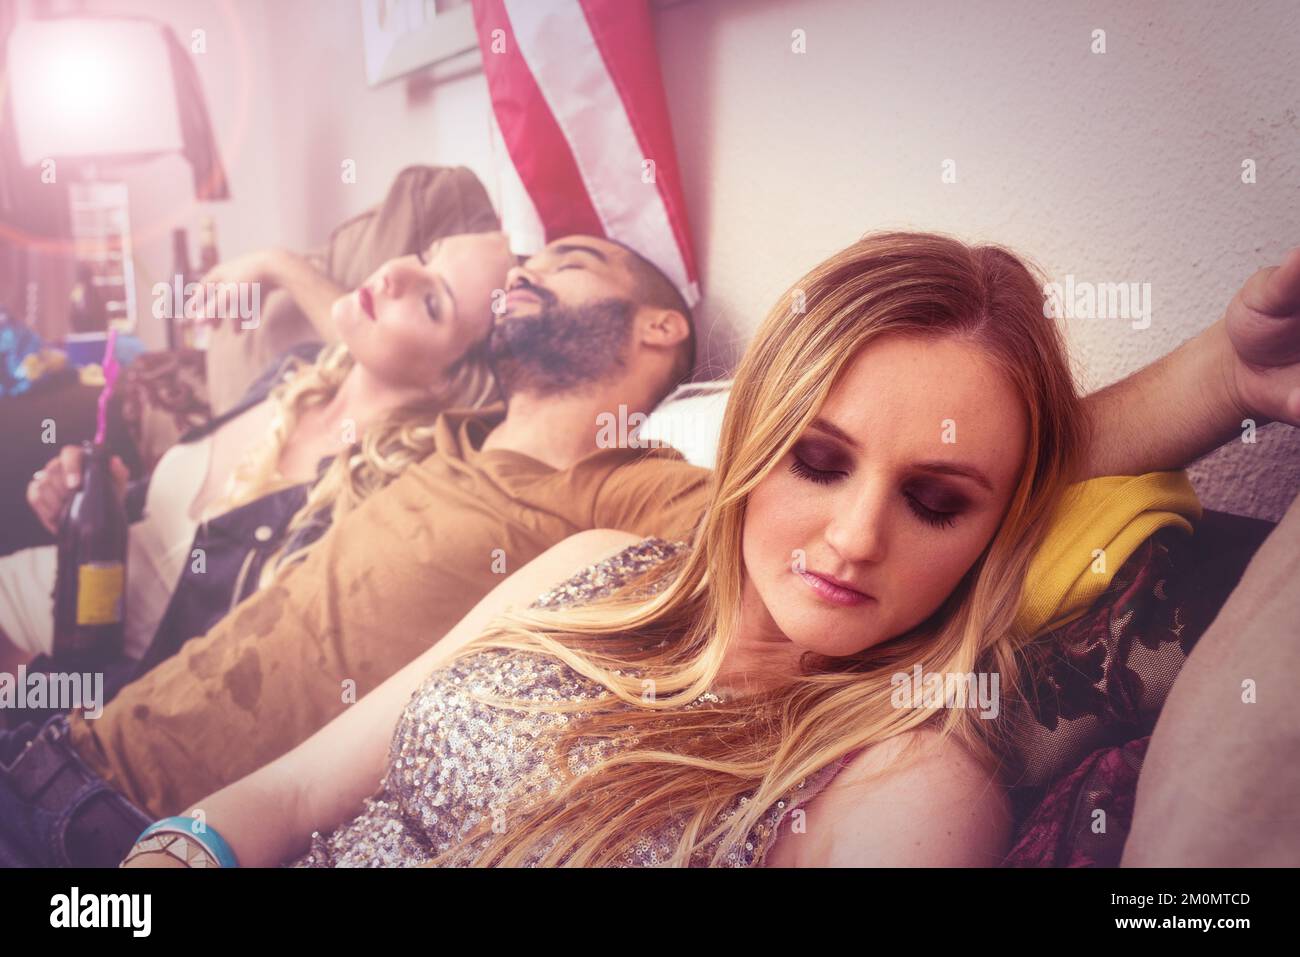 Drunk, sleeping and real people at a party on a sofa with a hangover from a celebration at a house. Tired, alcoholic and young man taking a nap with Stock Photo